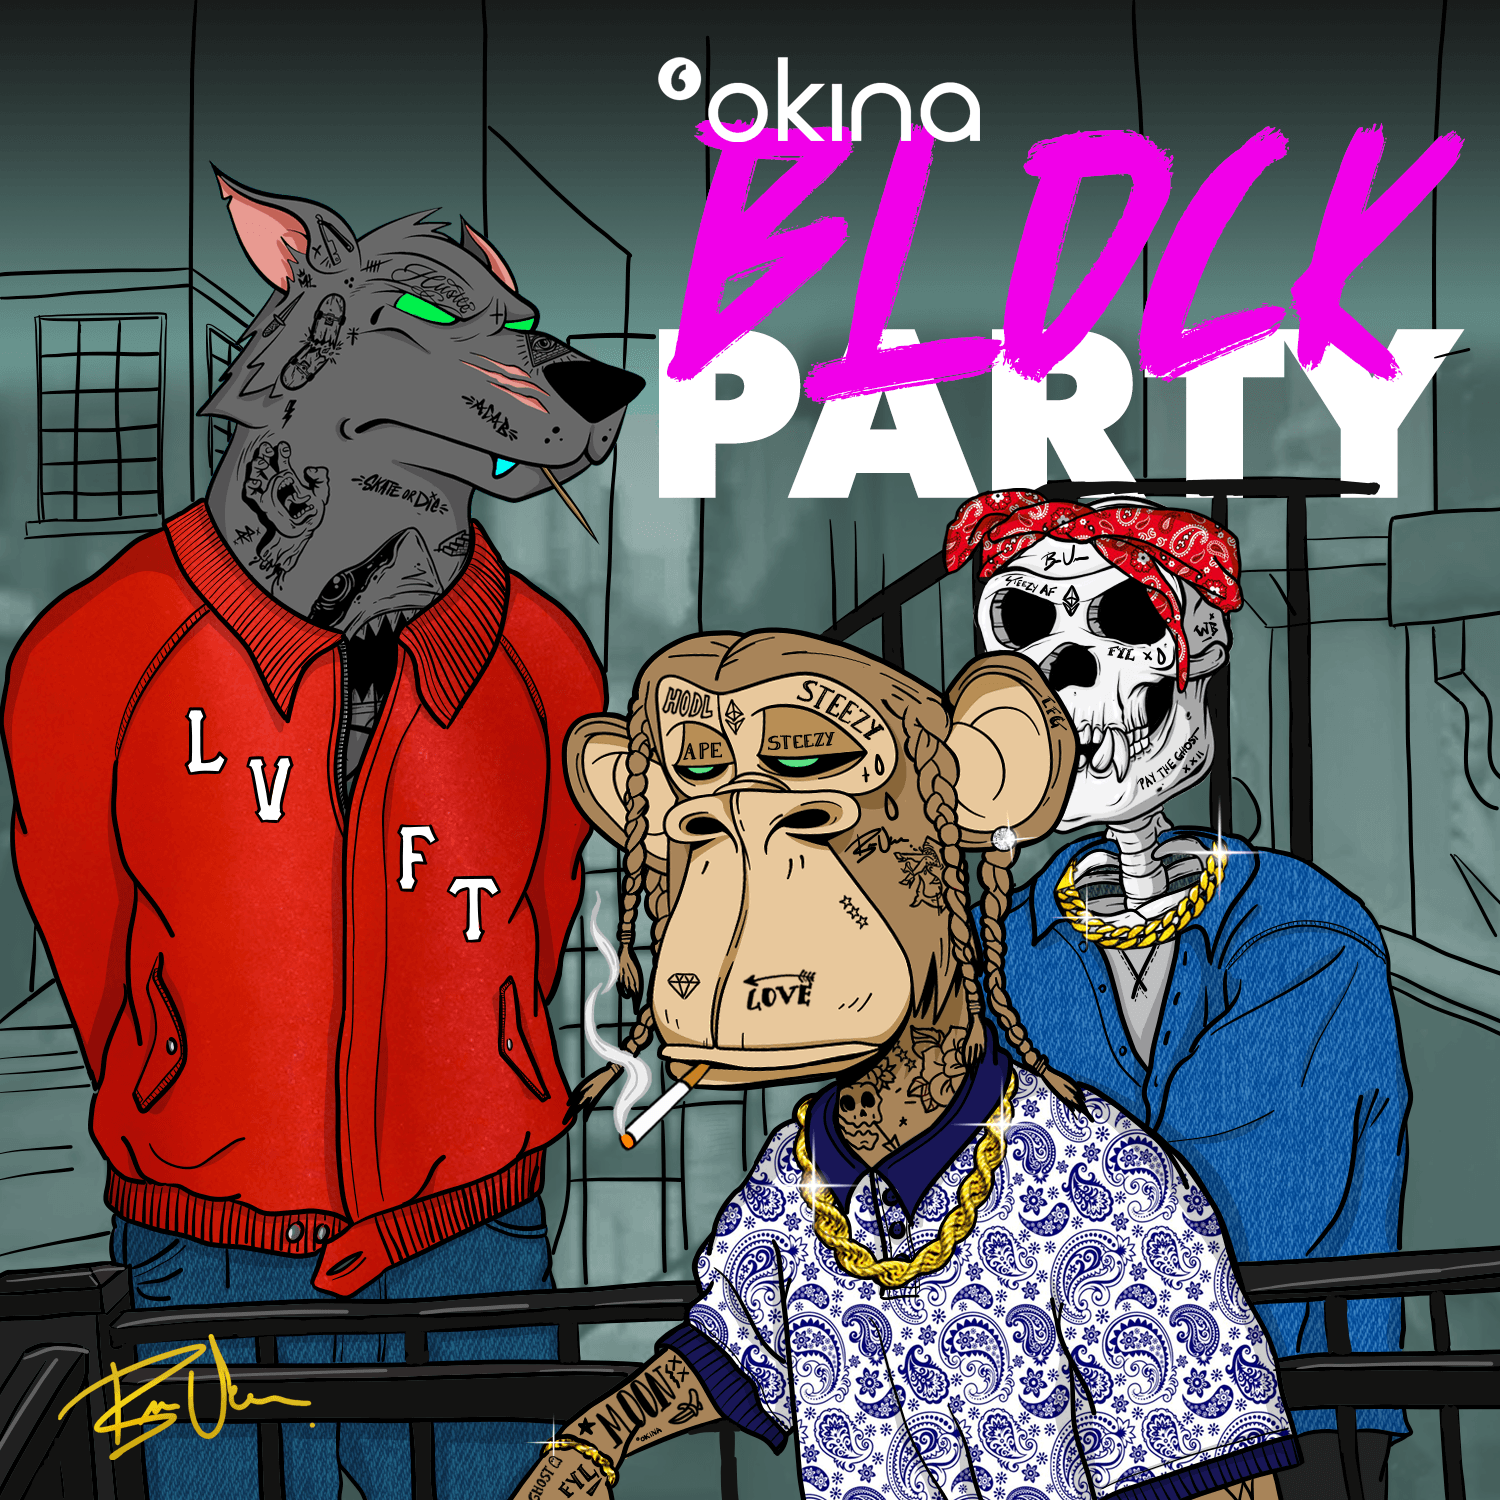 STEEZY MUSIC - OKINA BLOCK PARTY